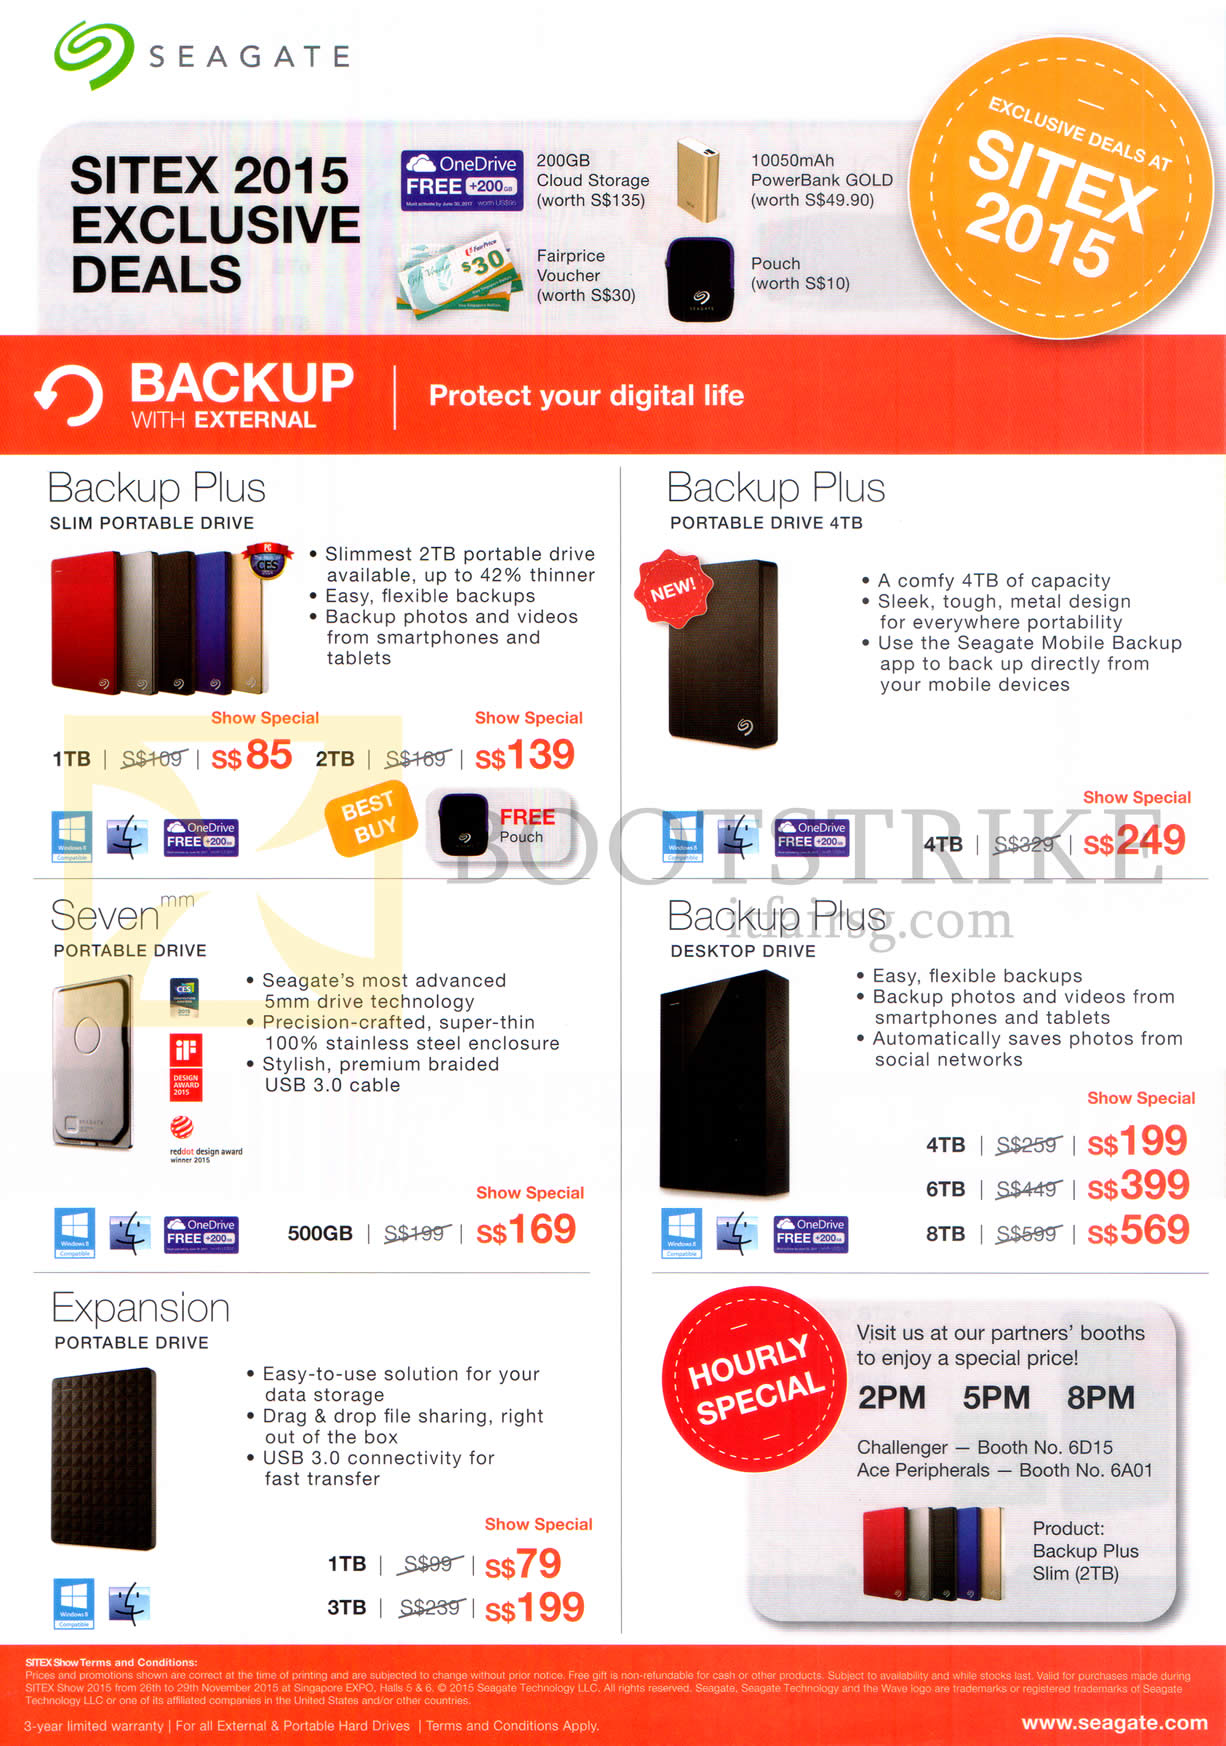 SITEX 2015 price list image brochure of Seagate Storage Solutions Backup Plus, Seven, Expansion Portable Drive, Backup Plus Desktop Drive, 1TB, 2TB, 3TB, 4TB, 6TB, 8TB